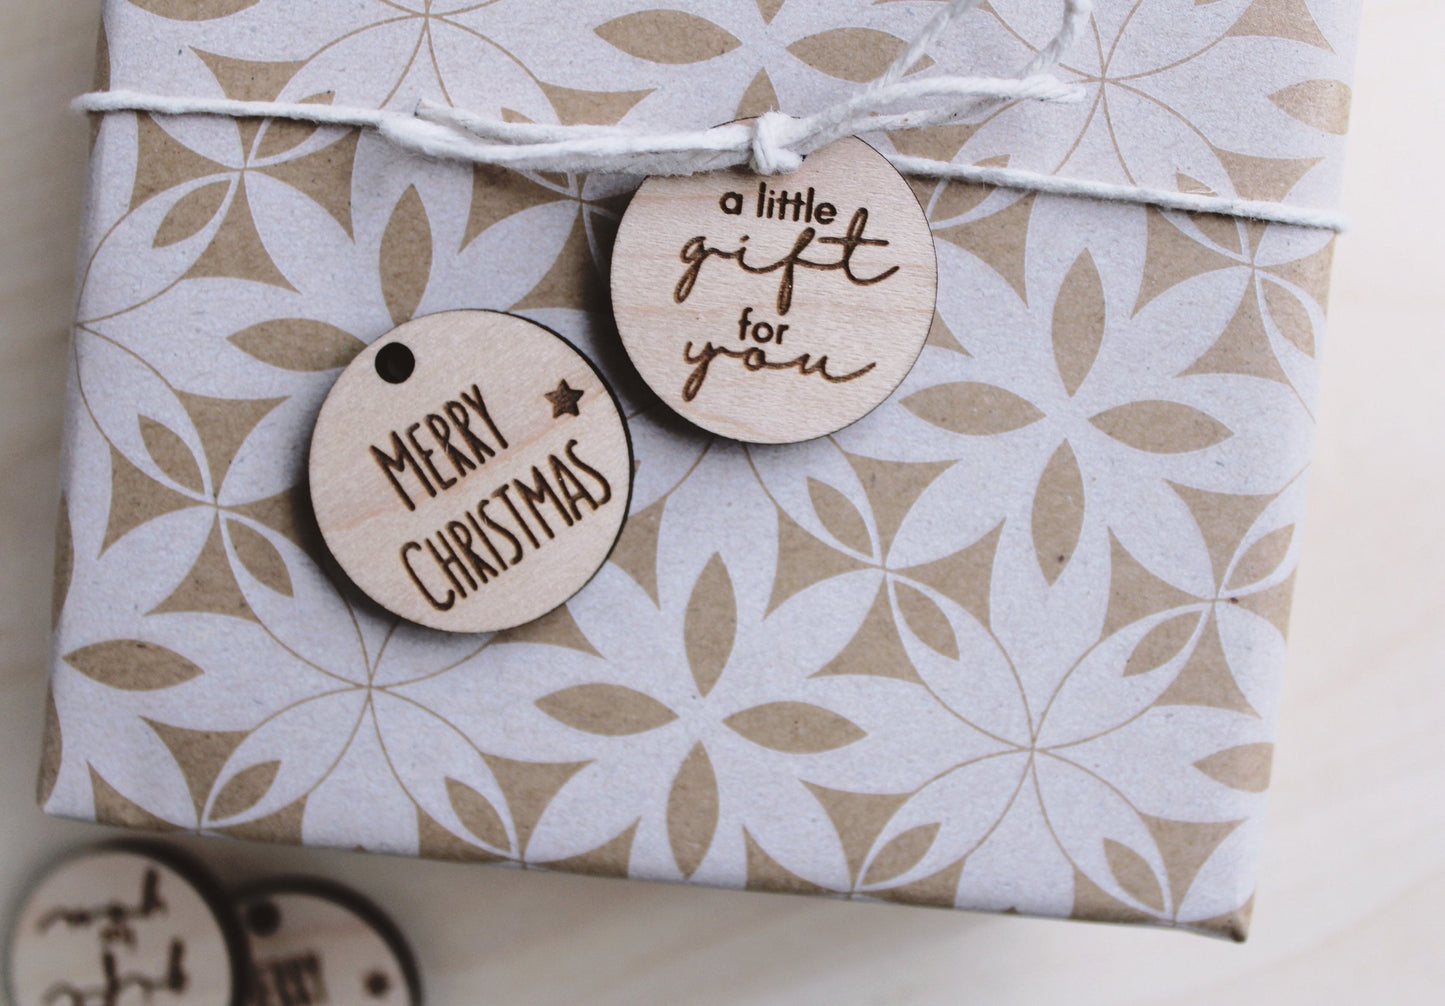 20 wood gift tags engraved with A Little Gift For You